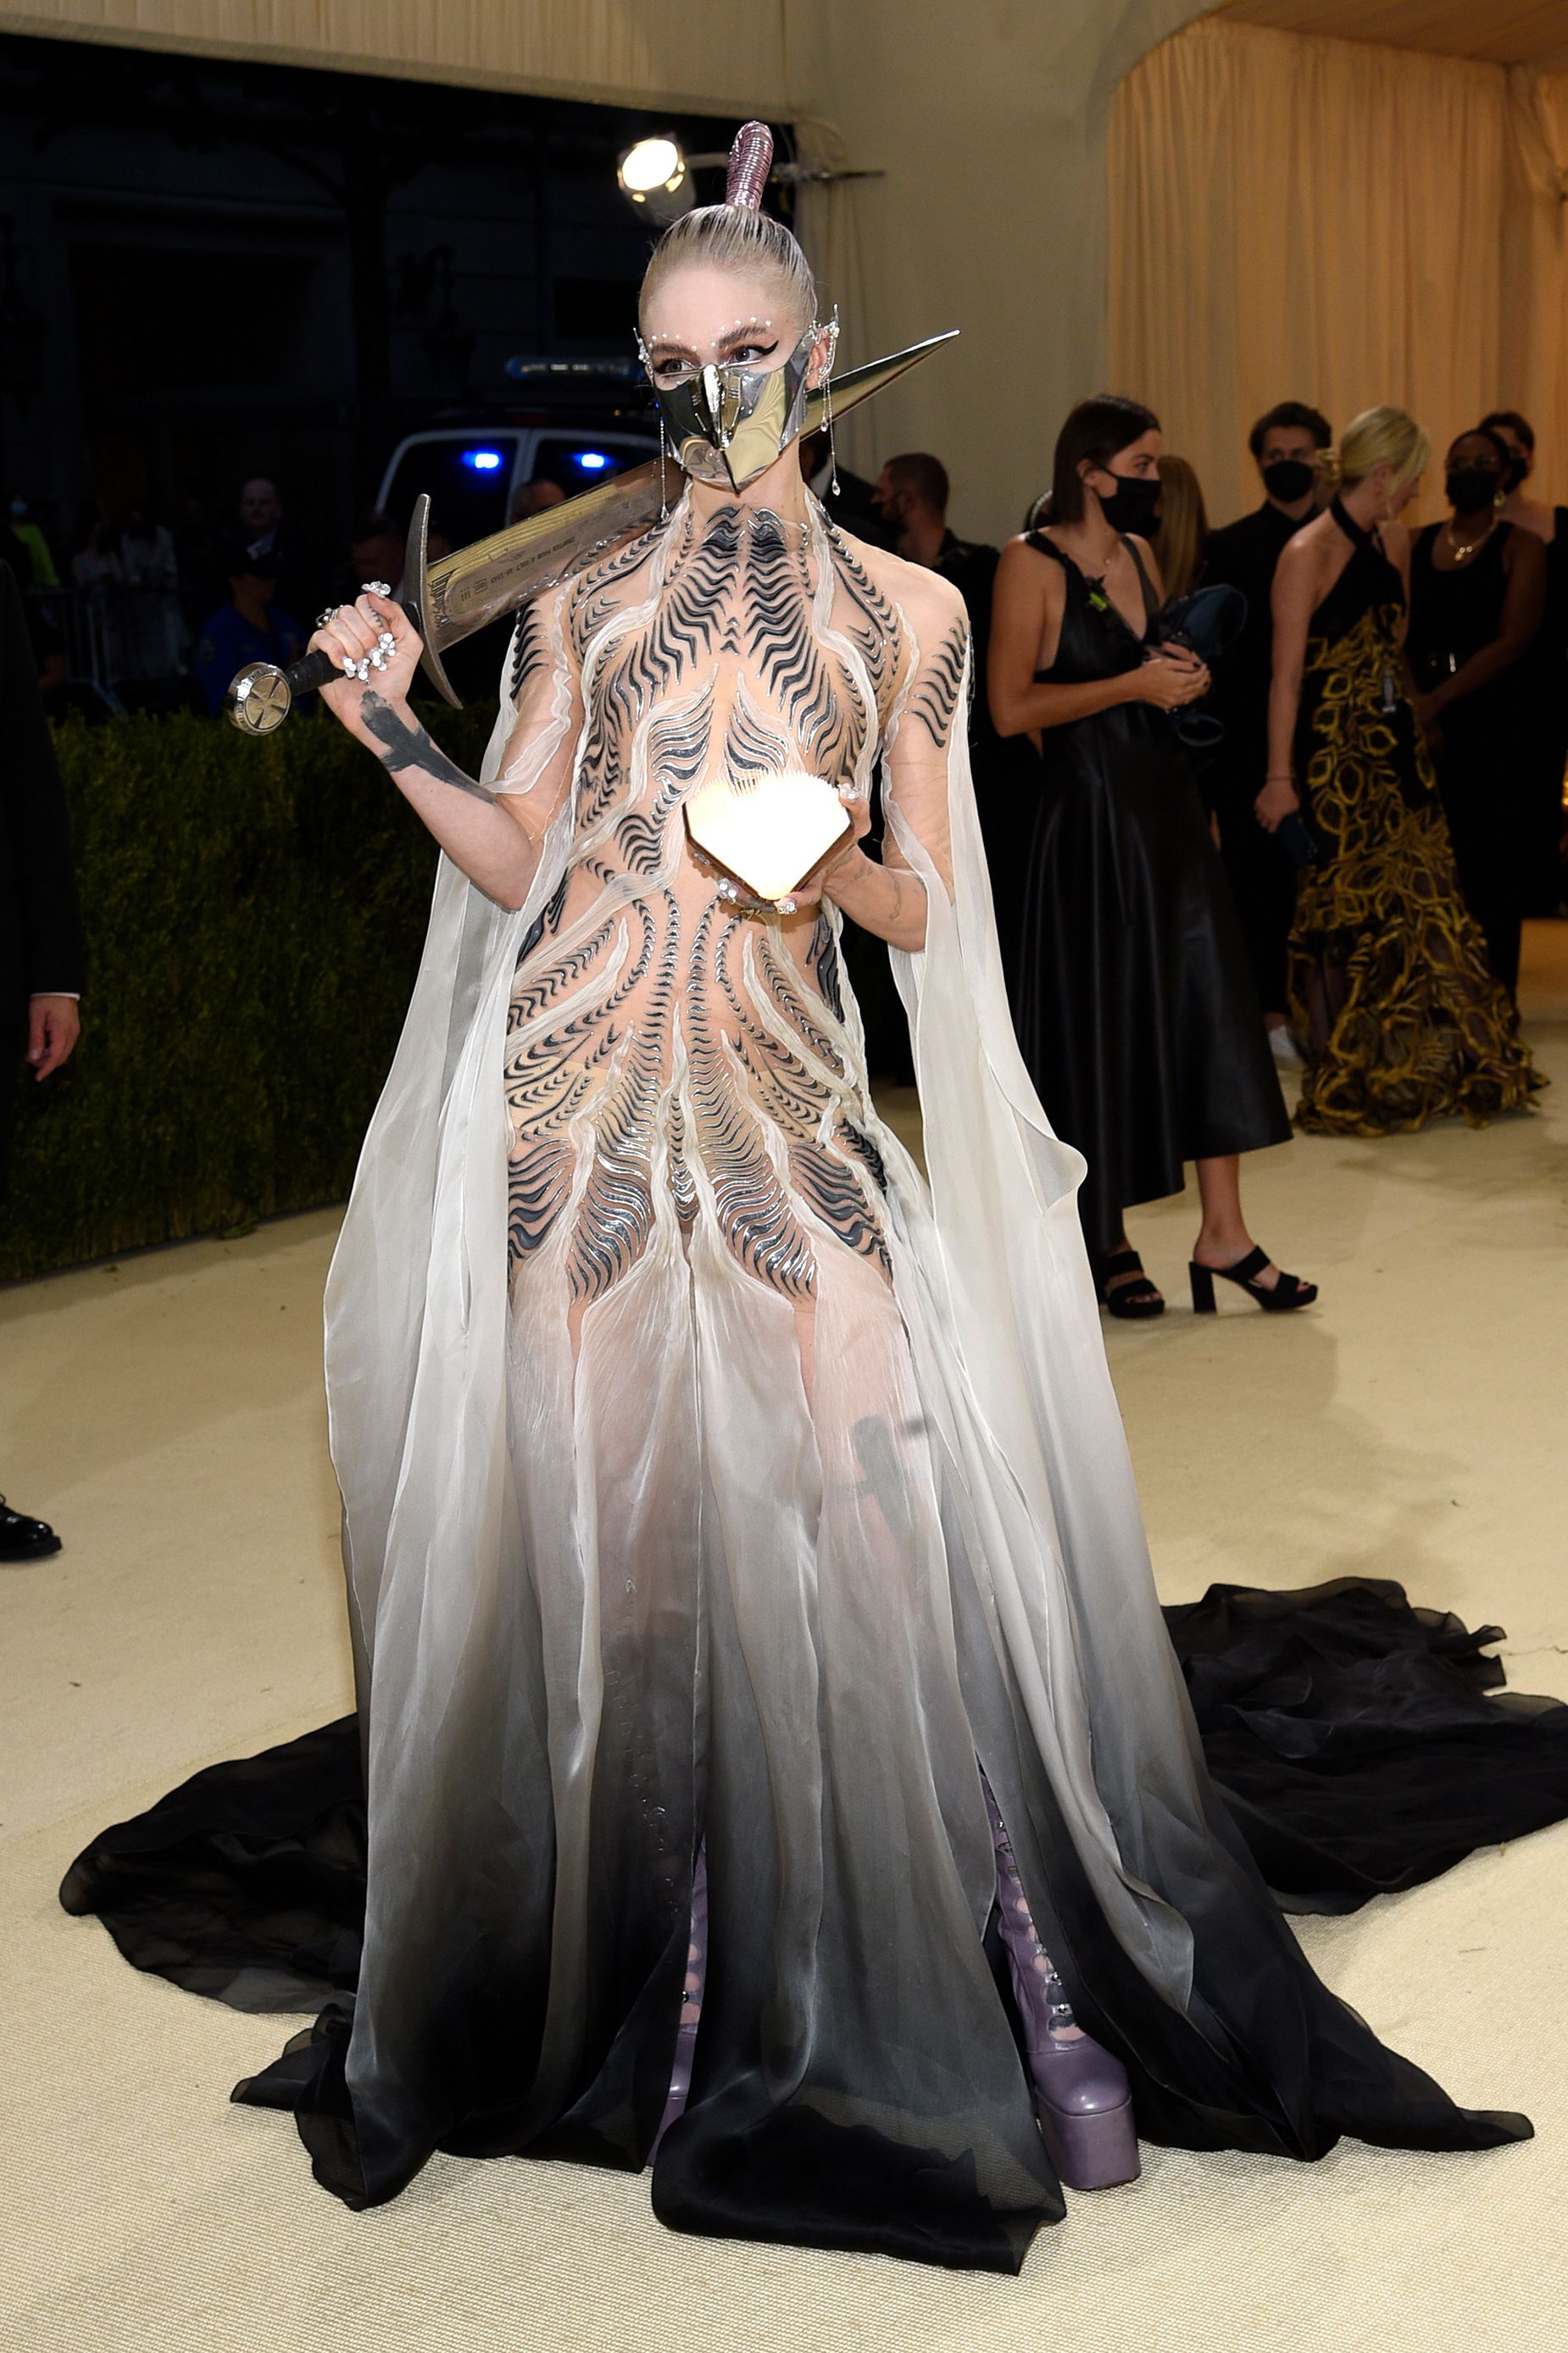 Musician Grimes attended the Met Gala in 2021 in a futuristic Iris van Herpen gown which took 900 hours to make.